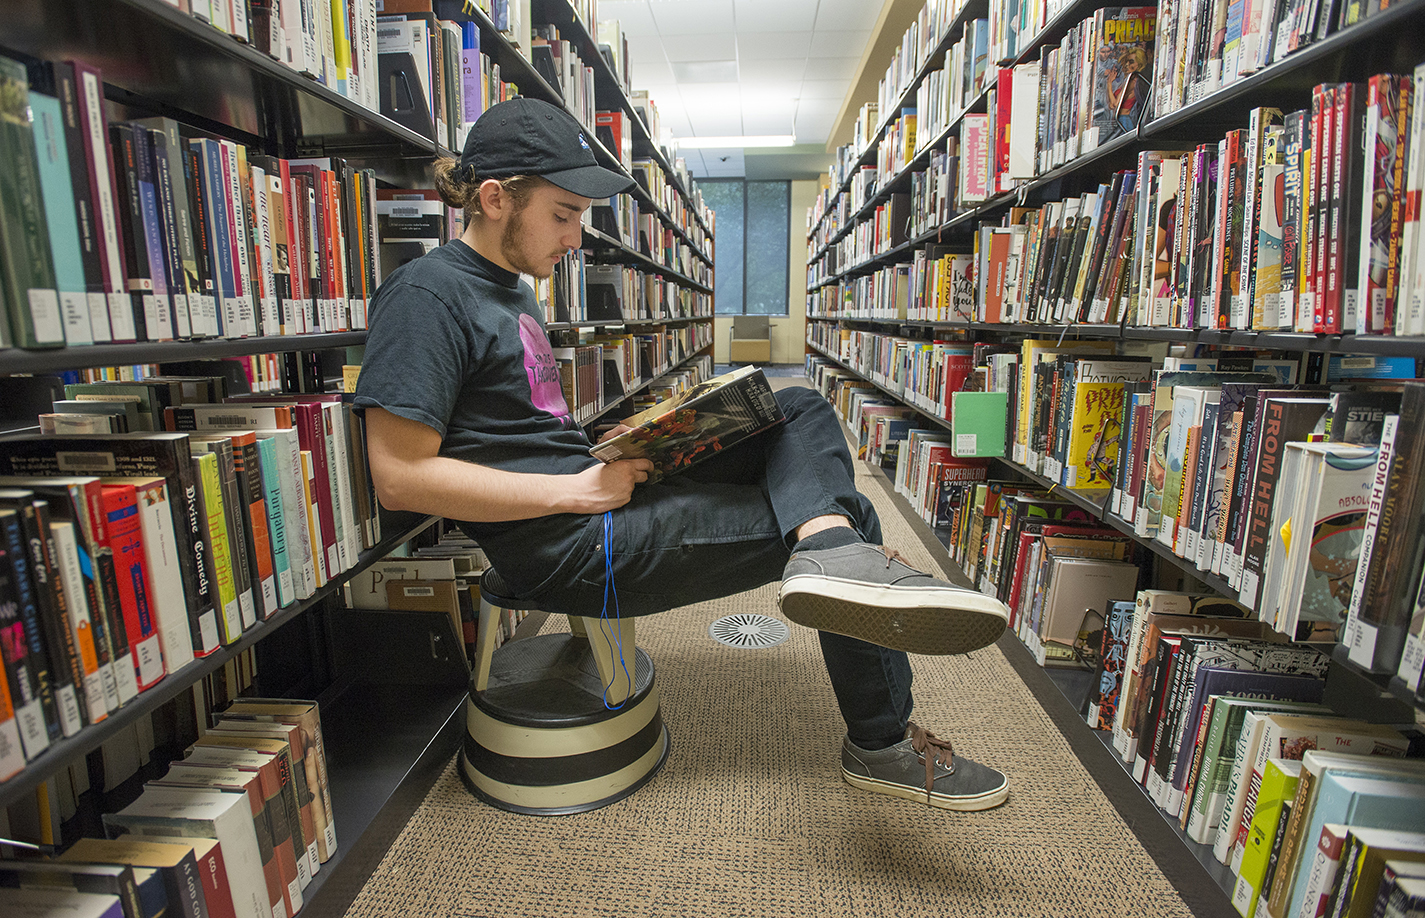 NW student Ashton Hinrjos passes time before his next class by sitting and reading in the TR library. TCC’s libraries provide students with a range of services.